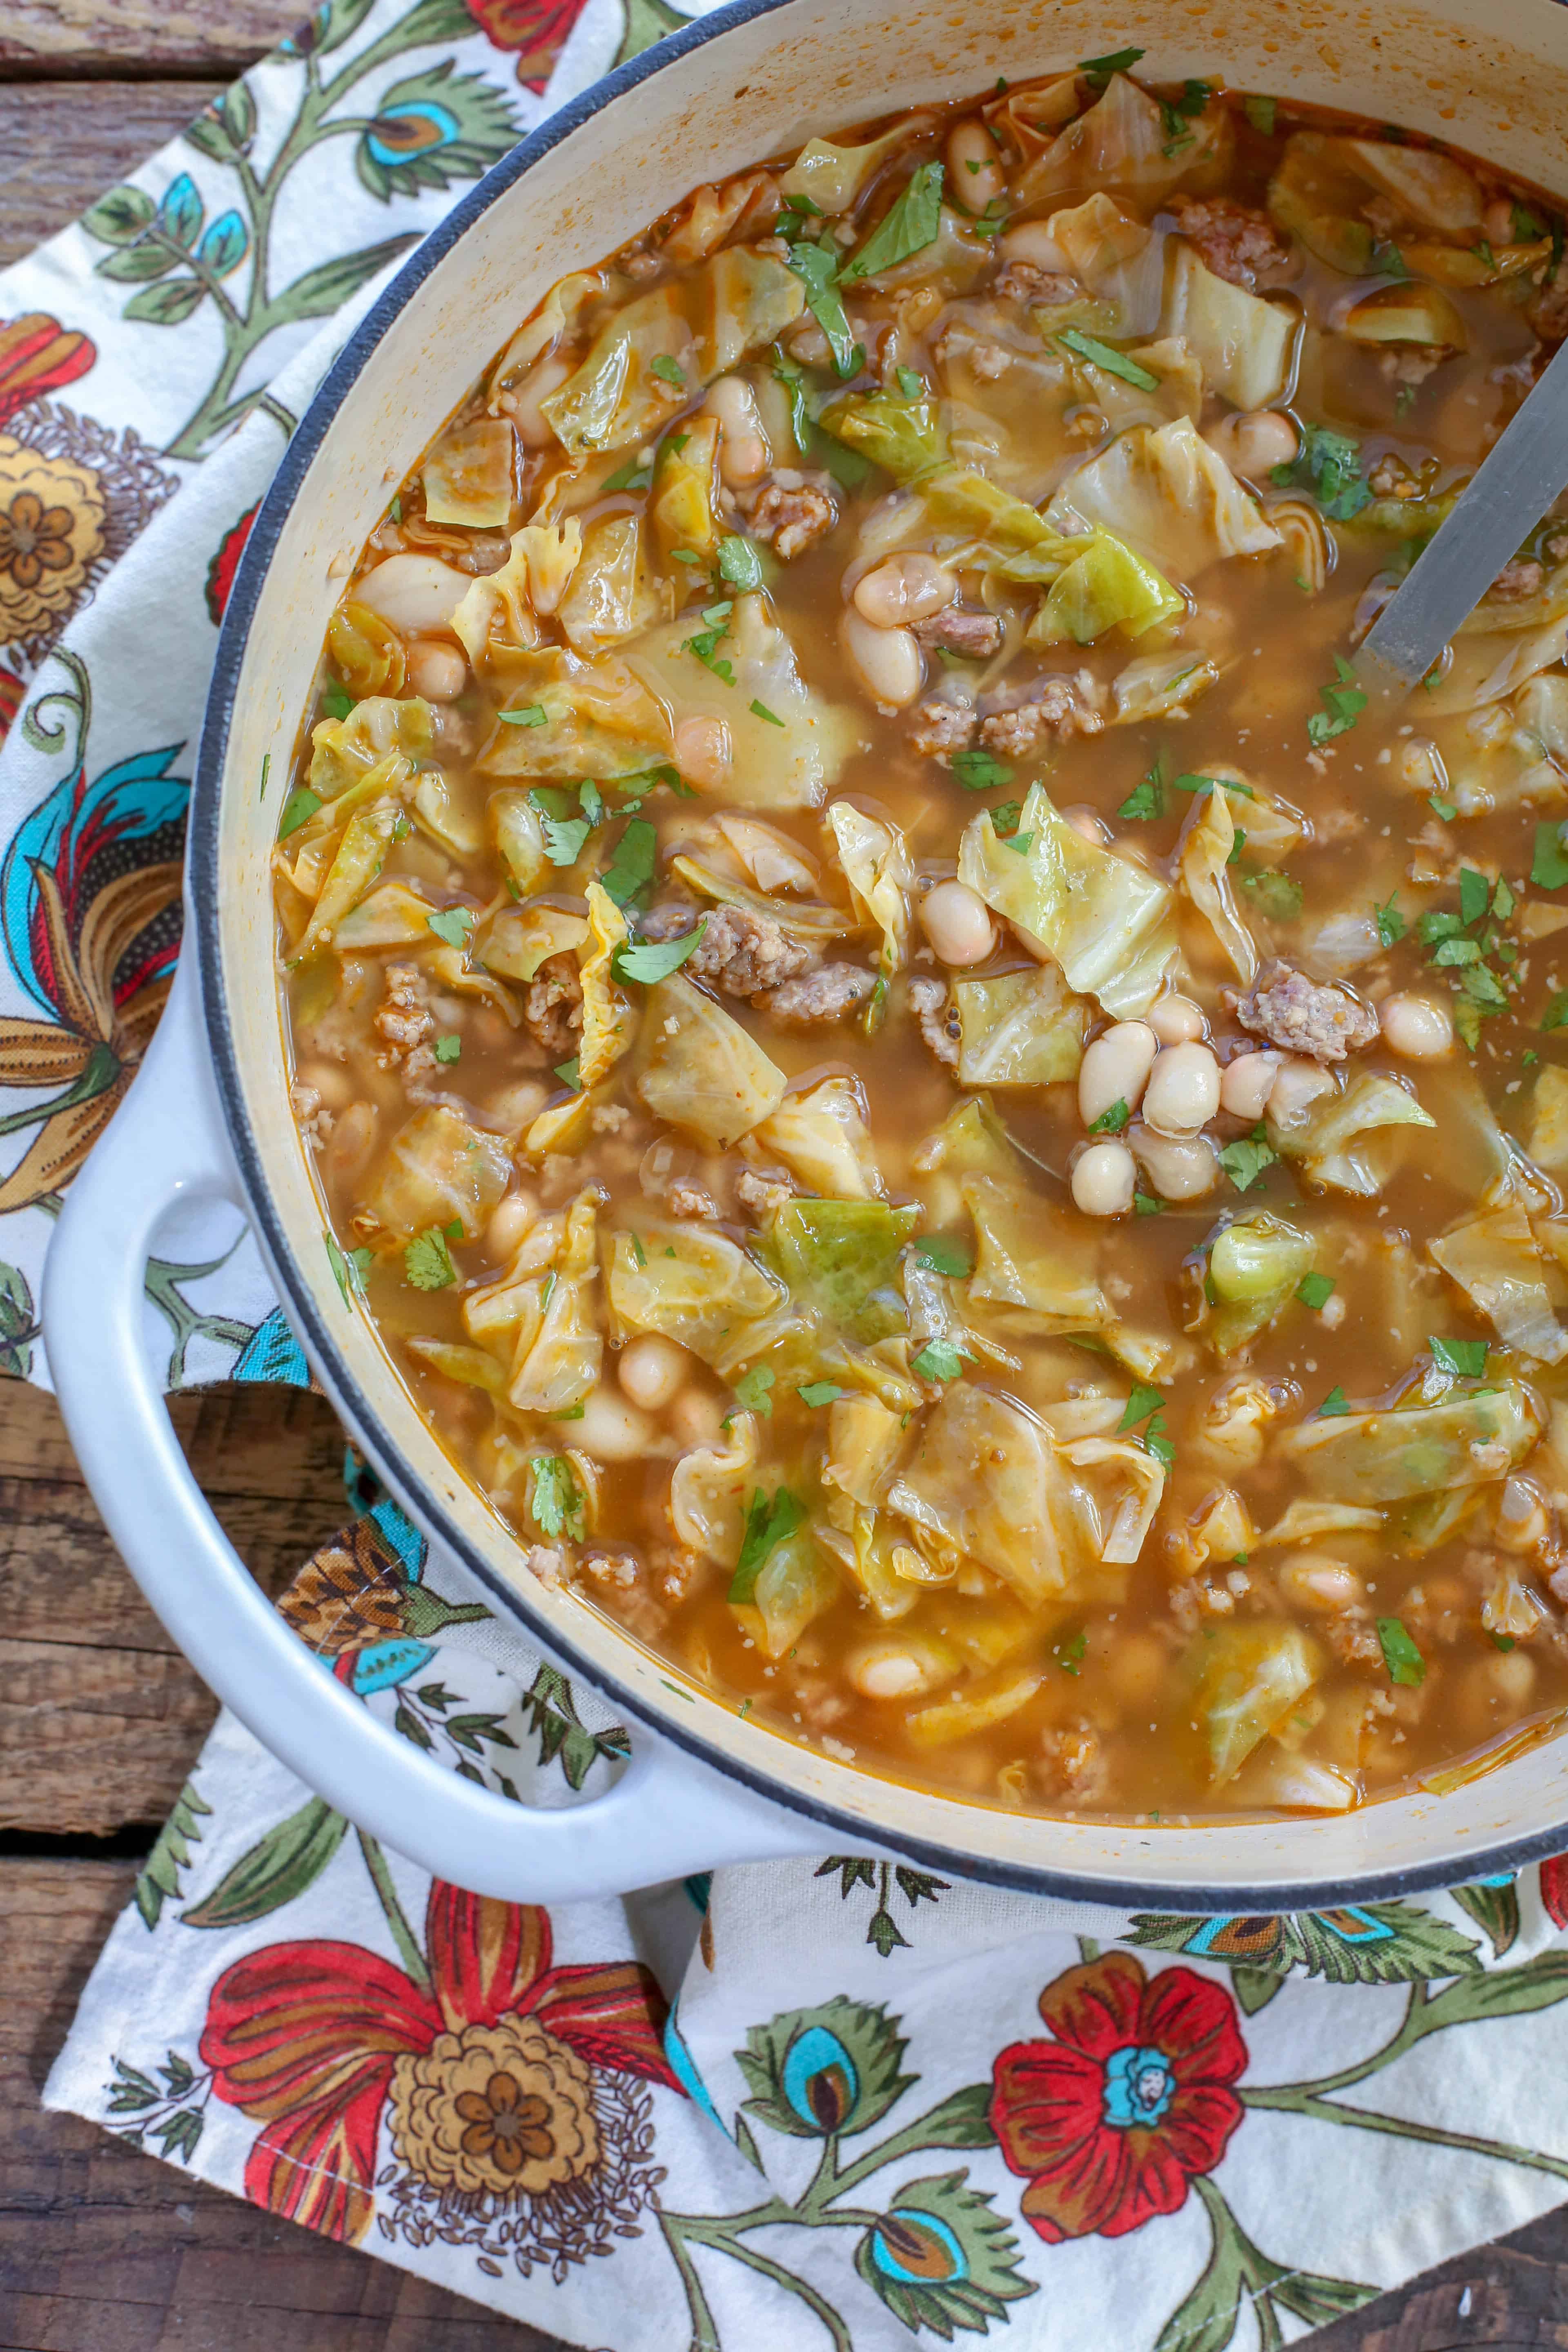 Mexican White Bean and Cabbage Soup